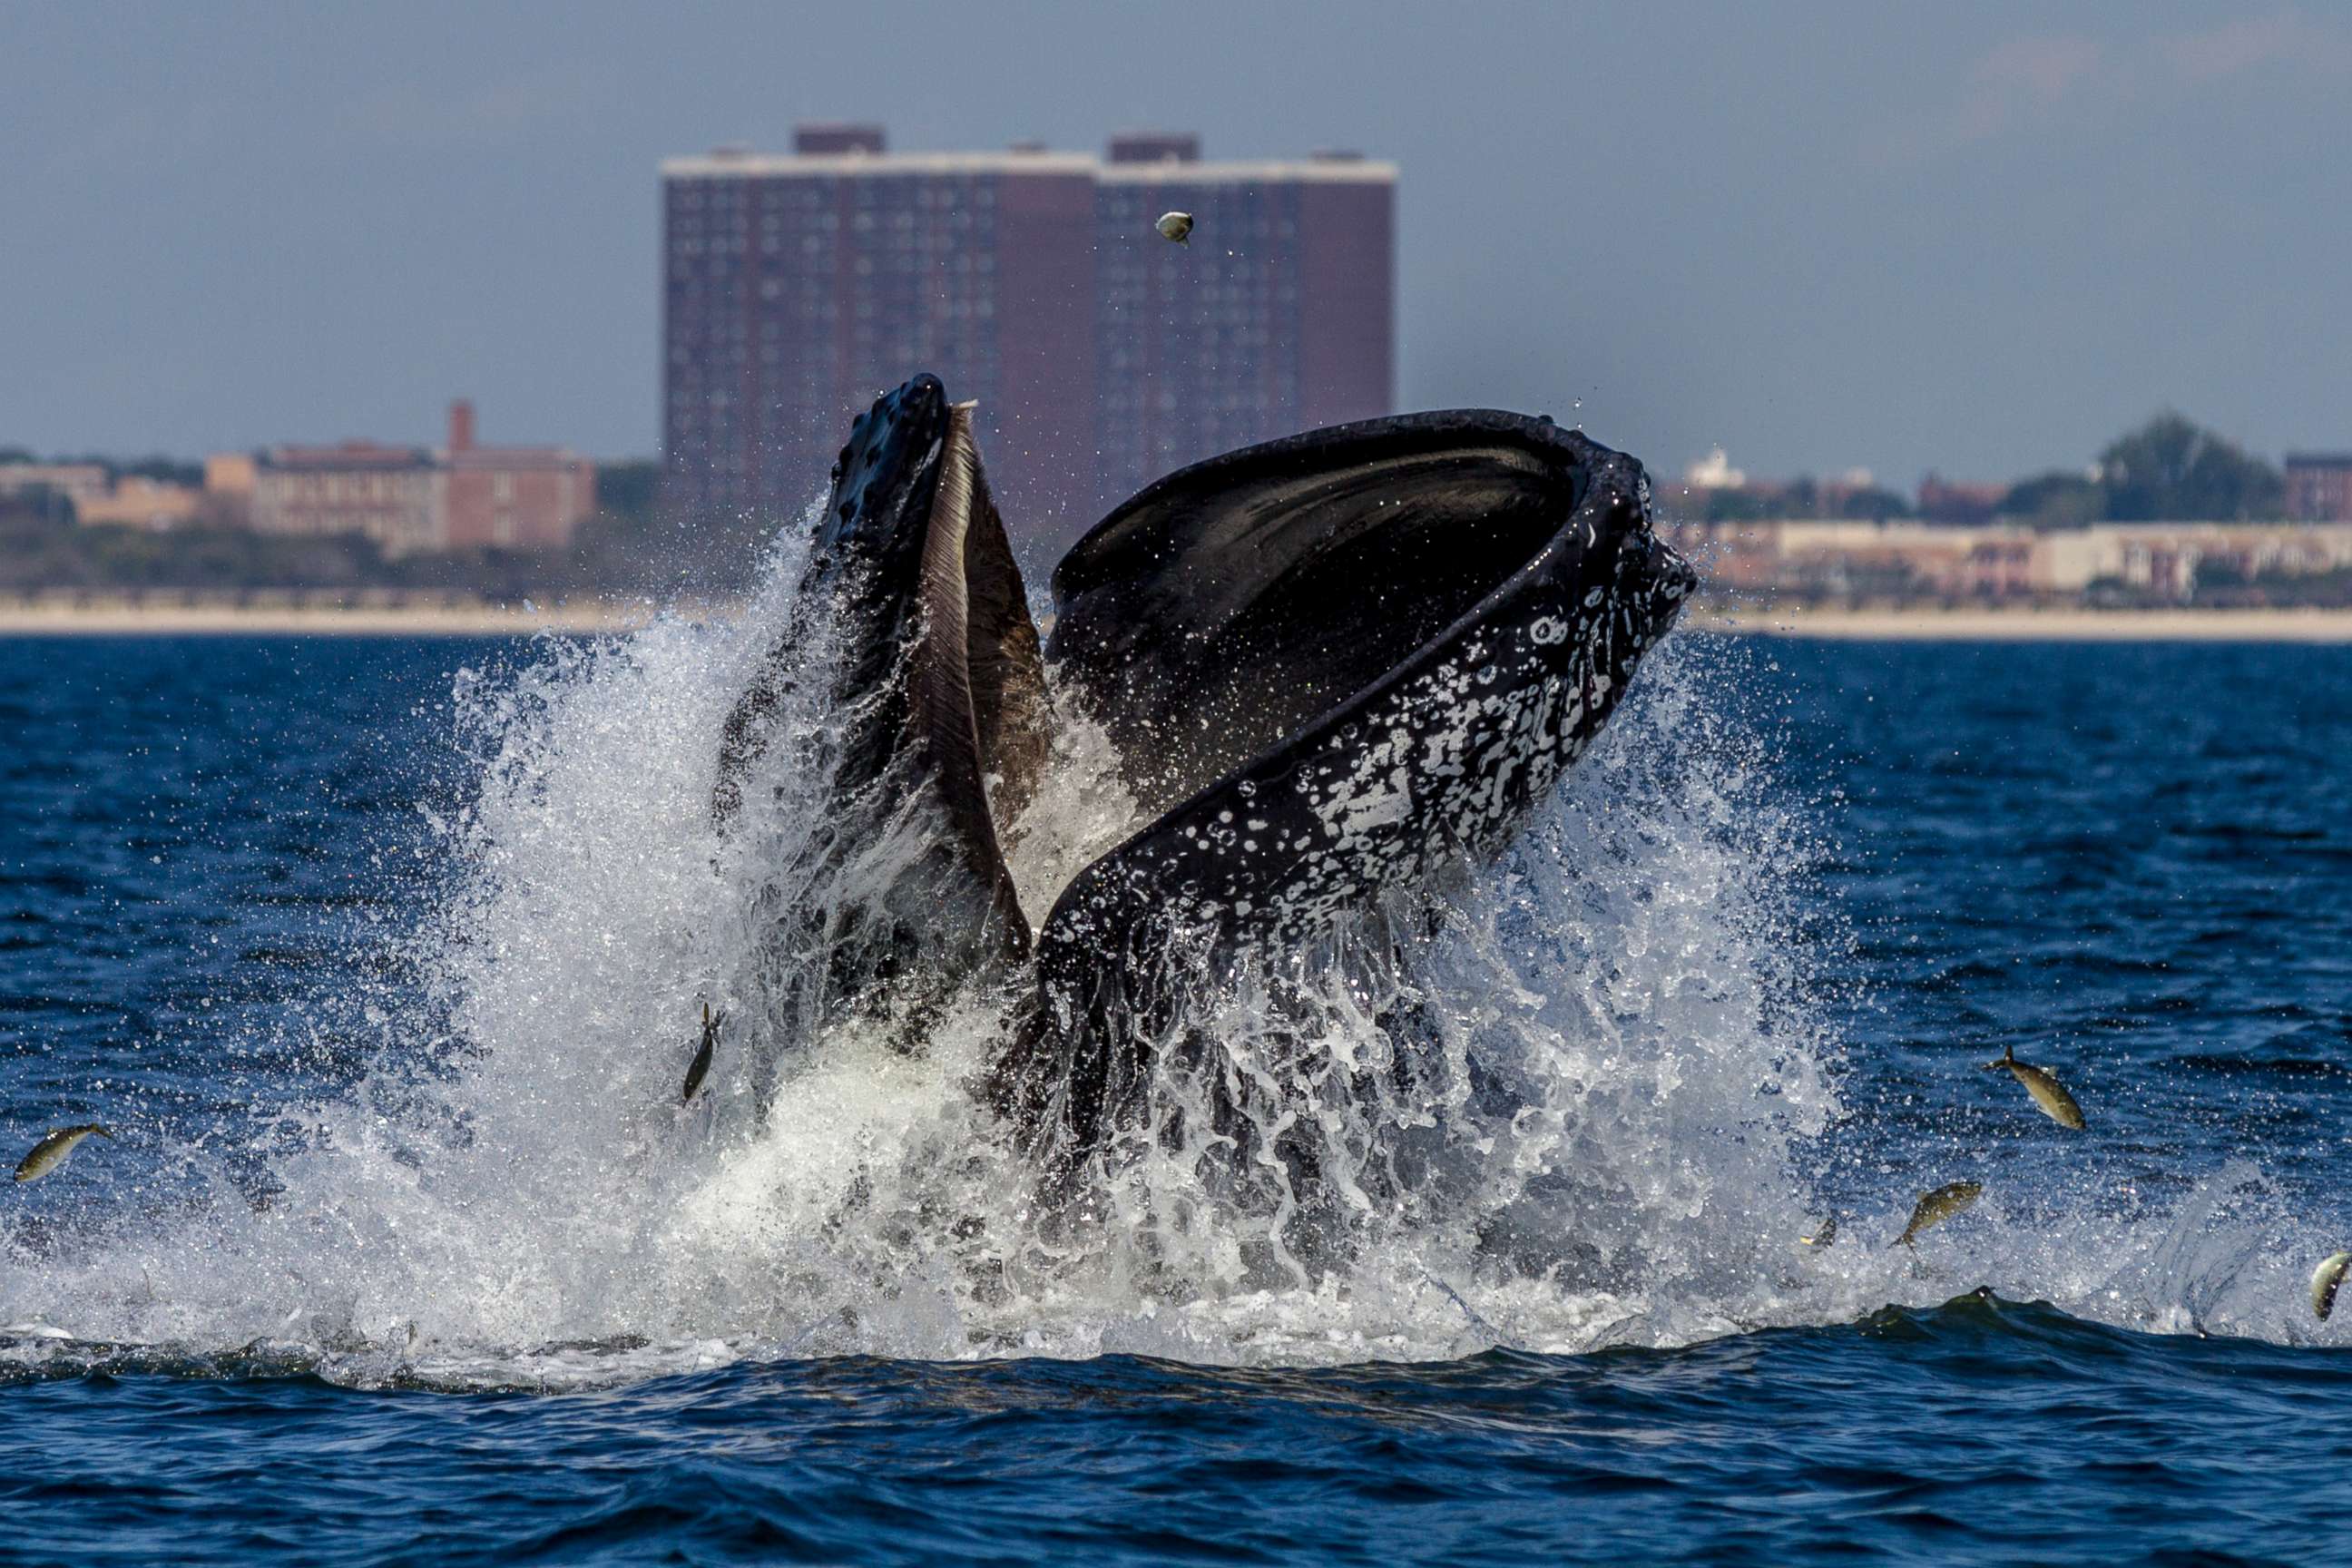 PHOTO: A Humpback whale lunge feeds off New York City's Rockaway Peninsula on Sept. 4, 2014.